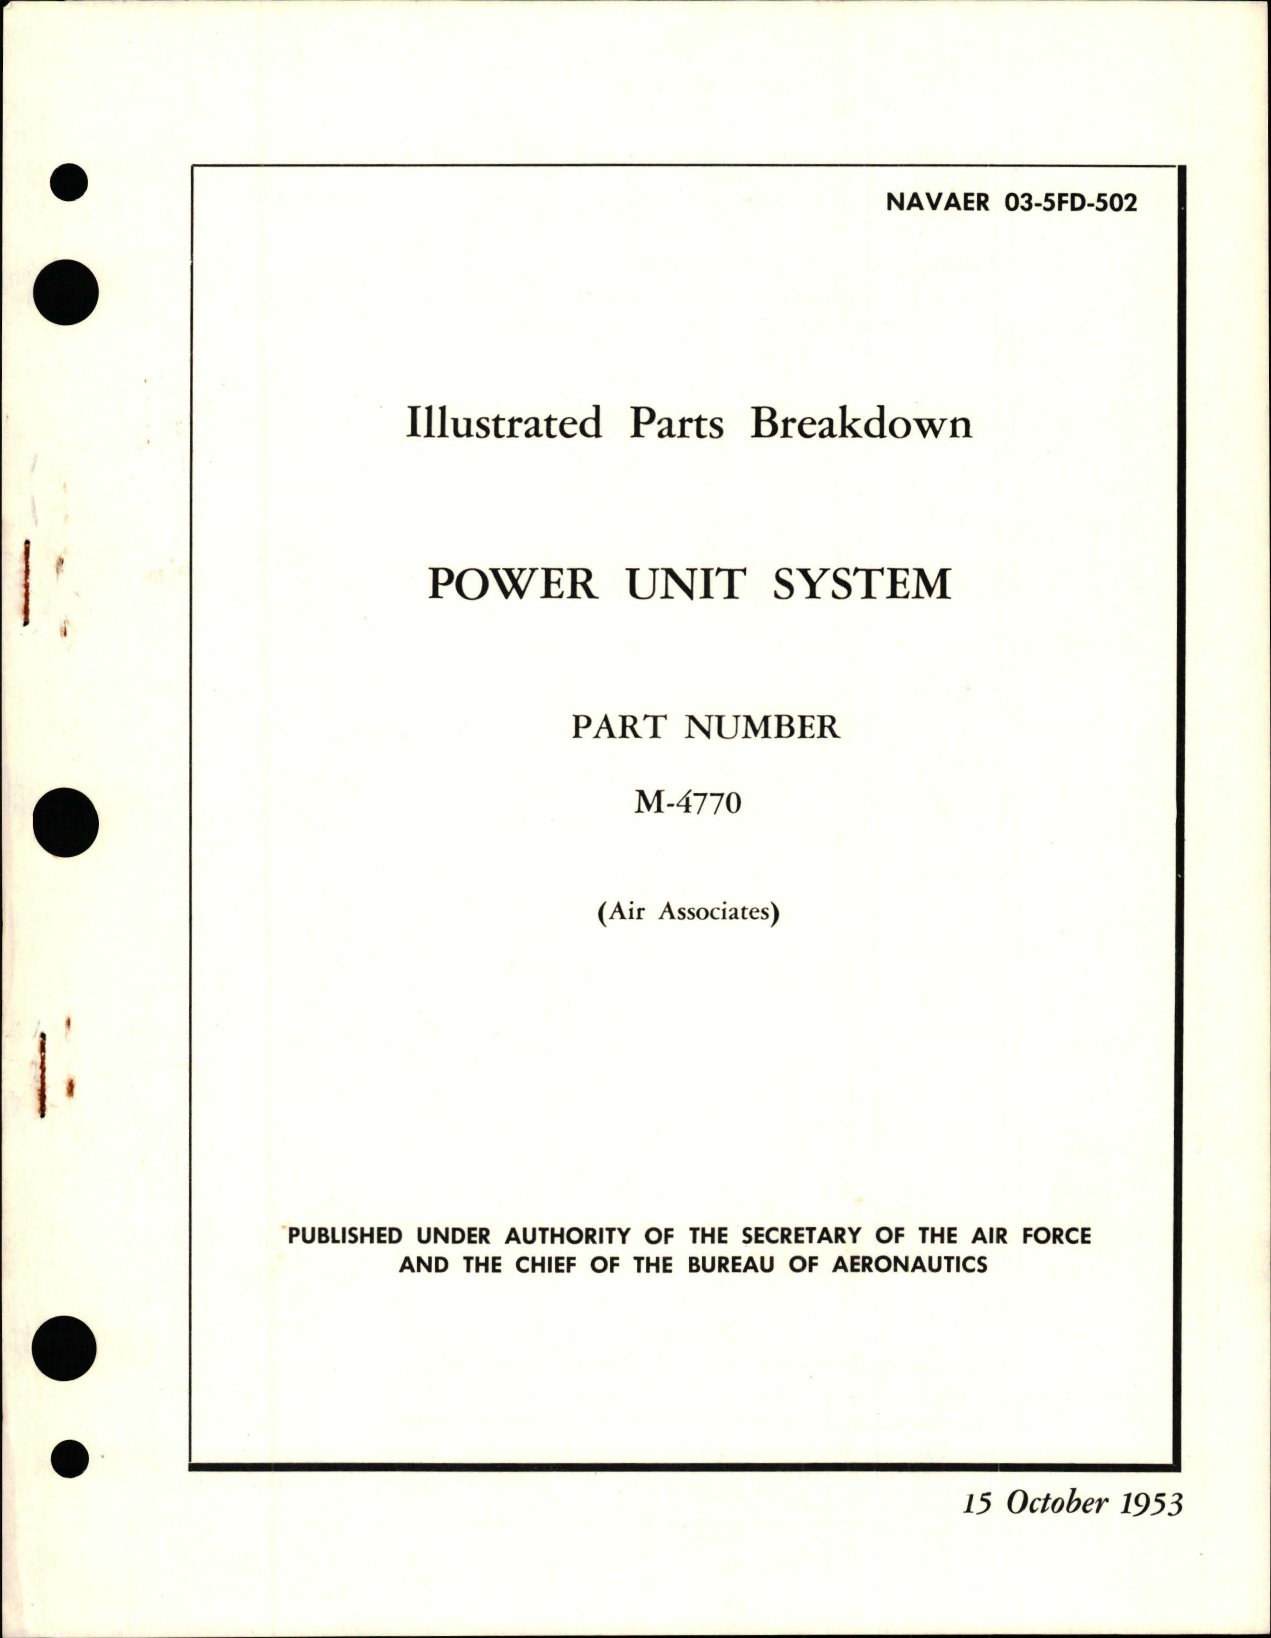 Sample page 1 from AirCorps Library document: Illustrated Parts Breakdown for Power Unit System - Part M-4770 